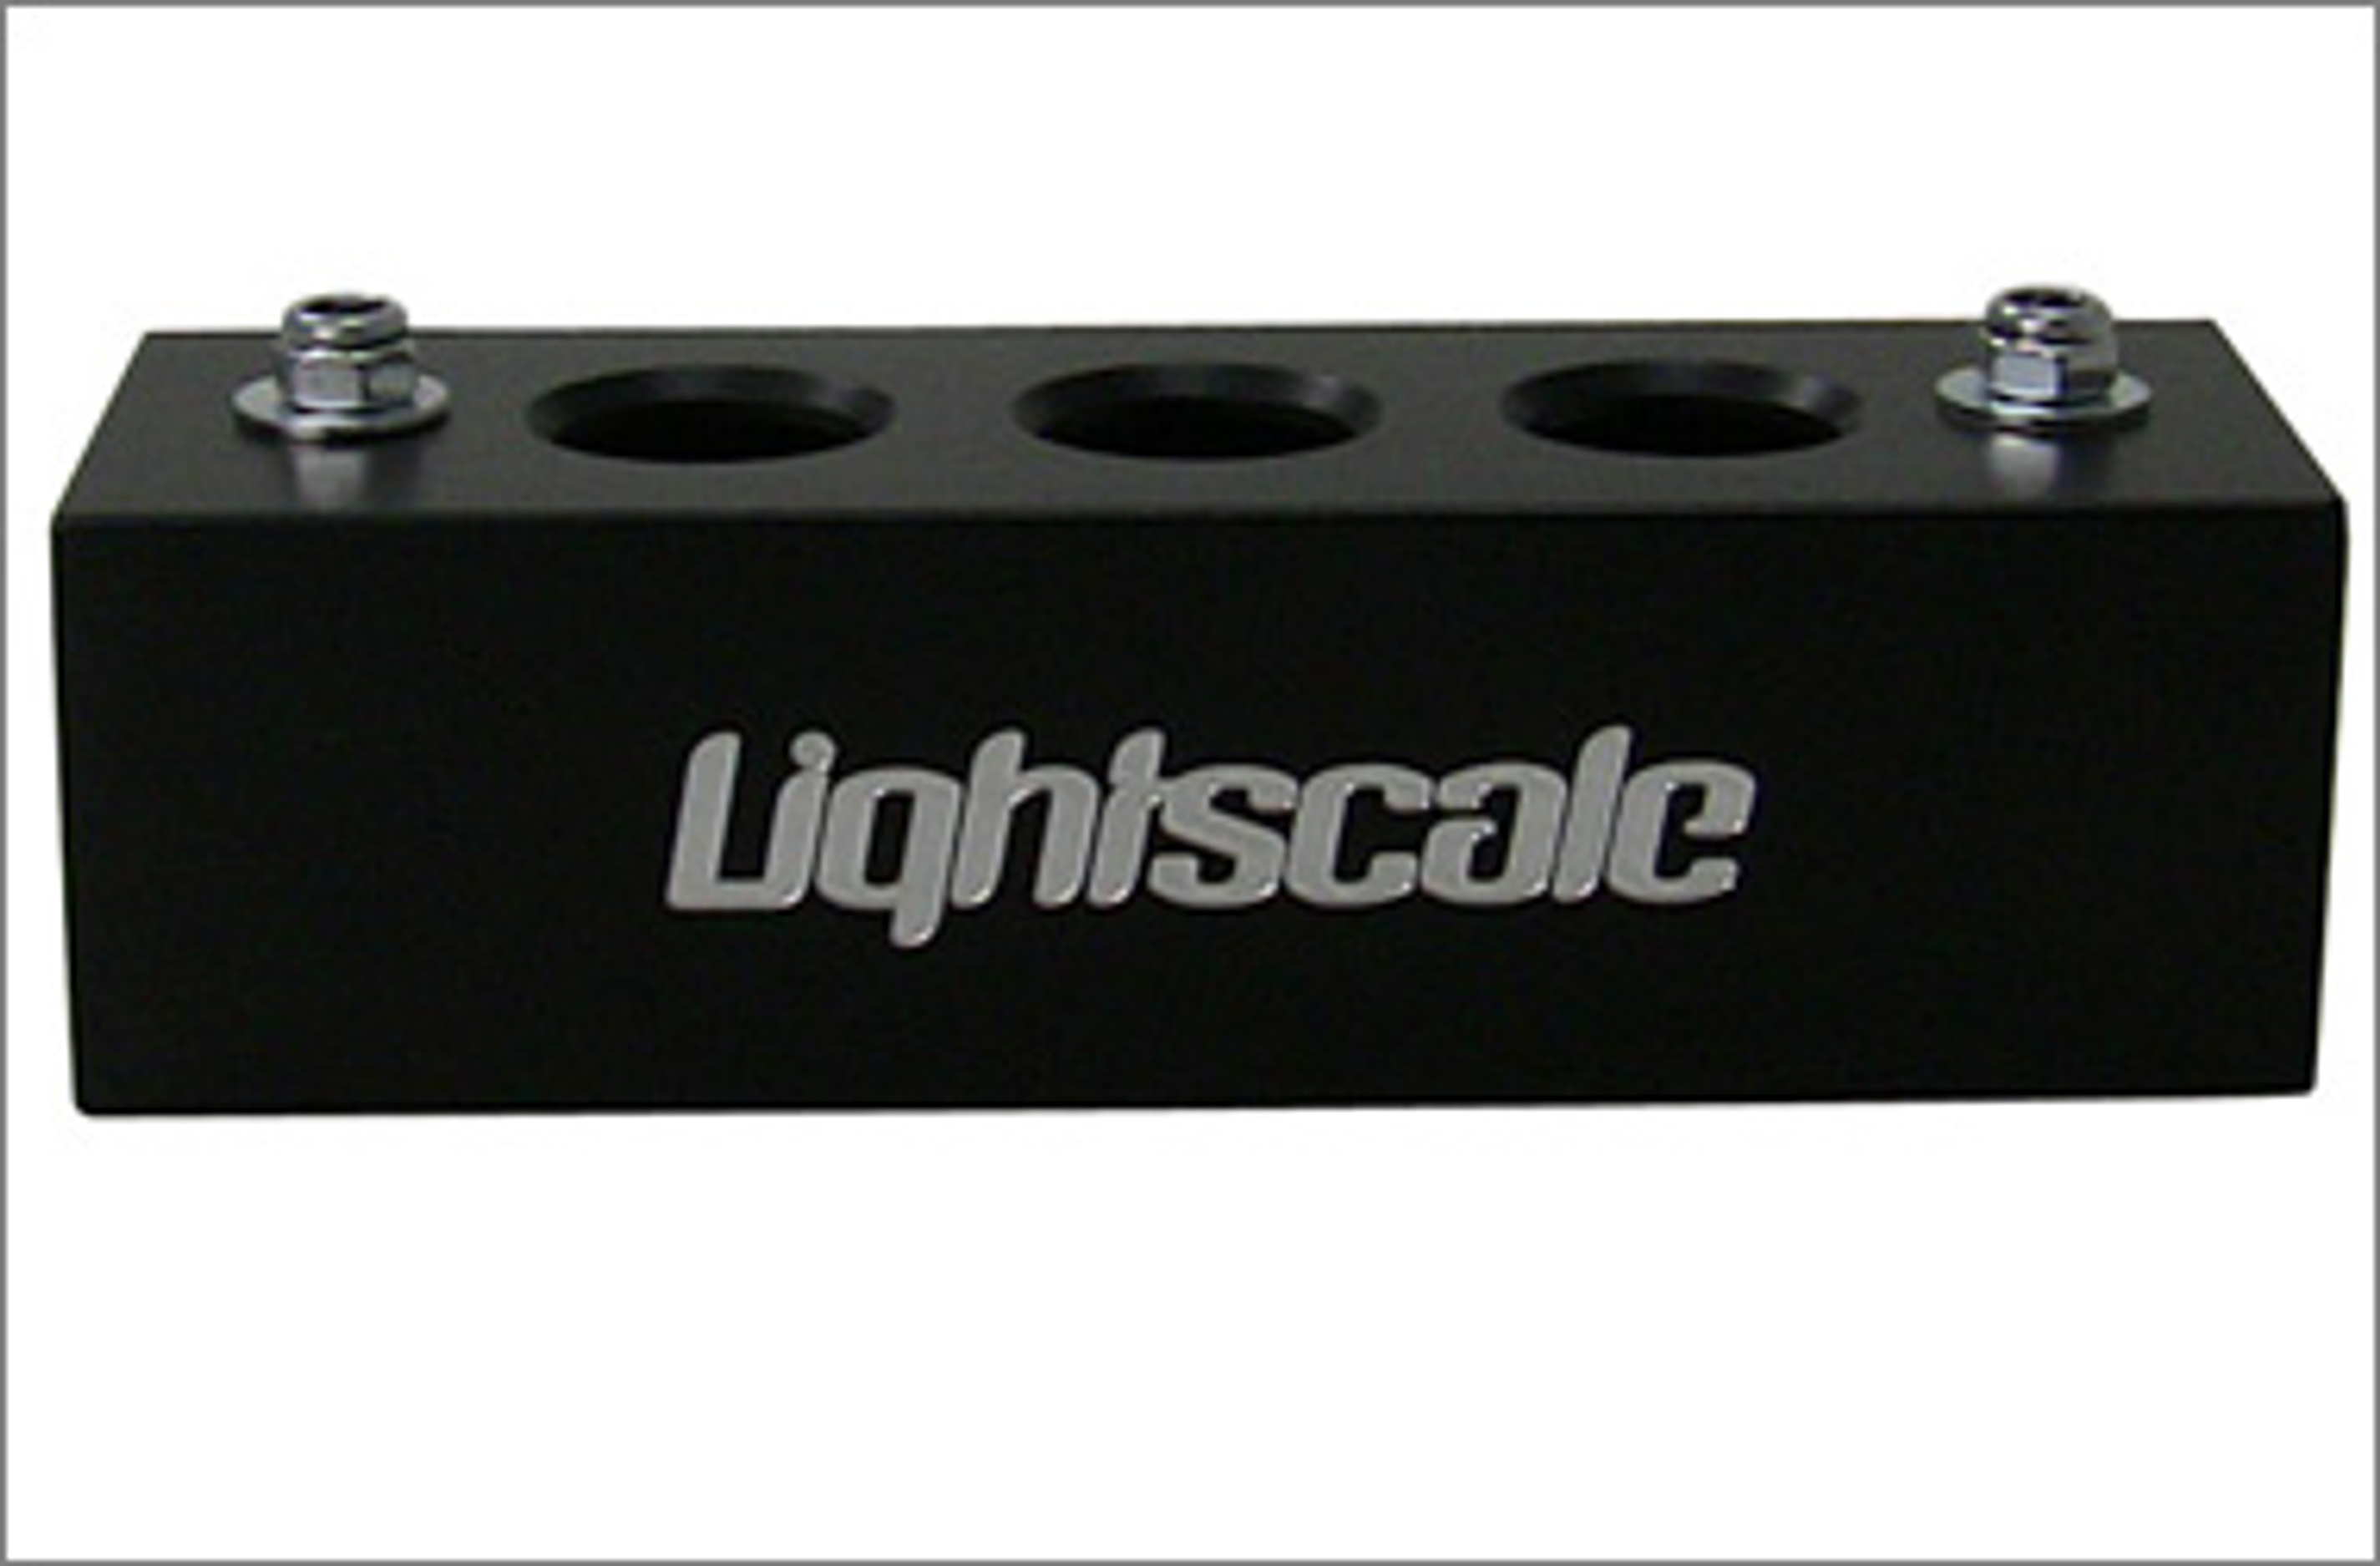 50353021 Support Blocks for the Lightscale Droop Gauge 35 mm rear, 1 pcs.